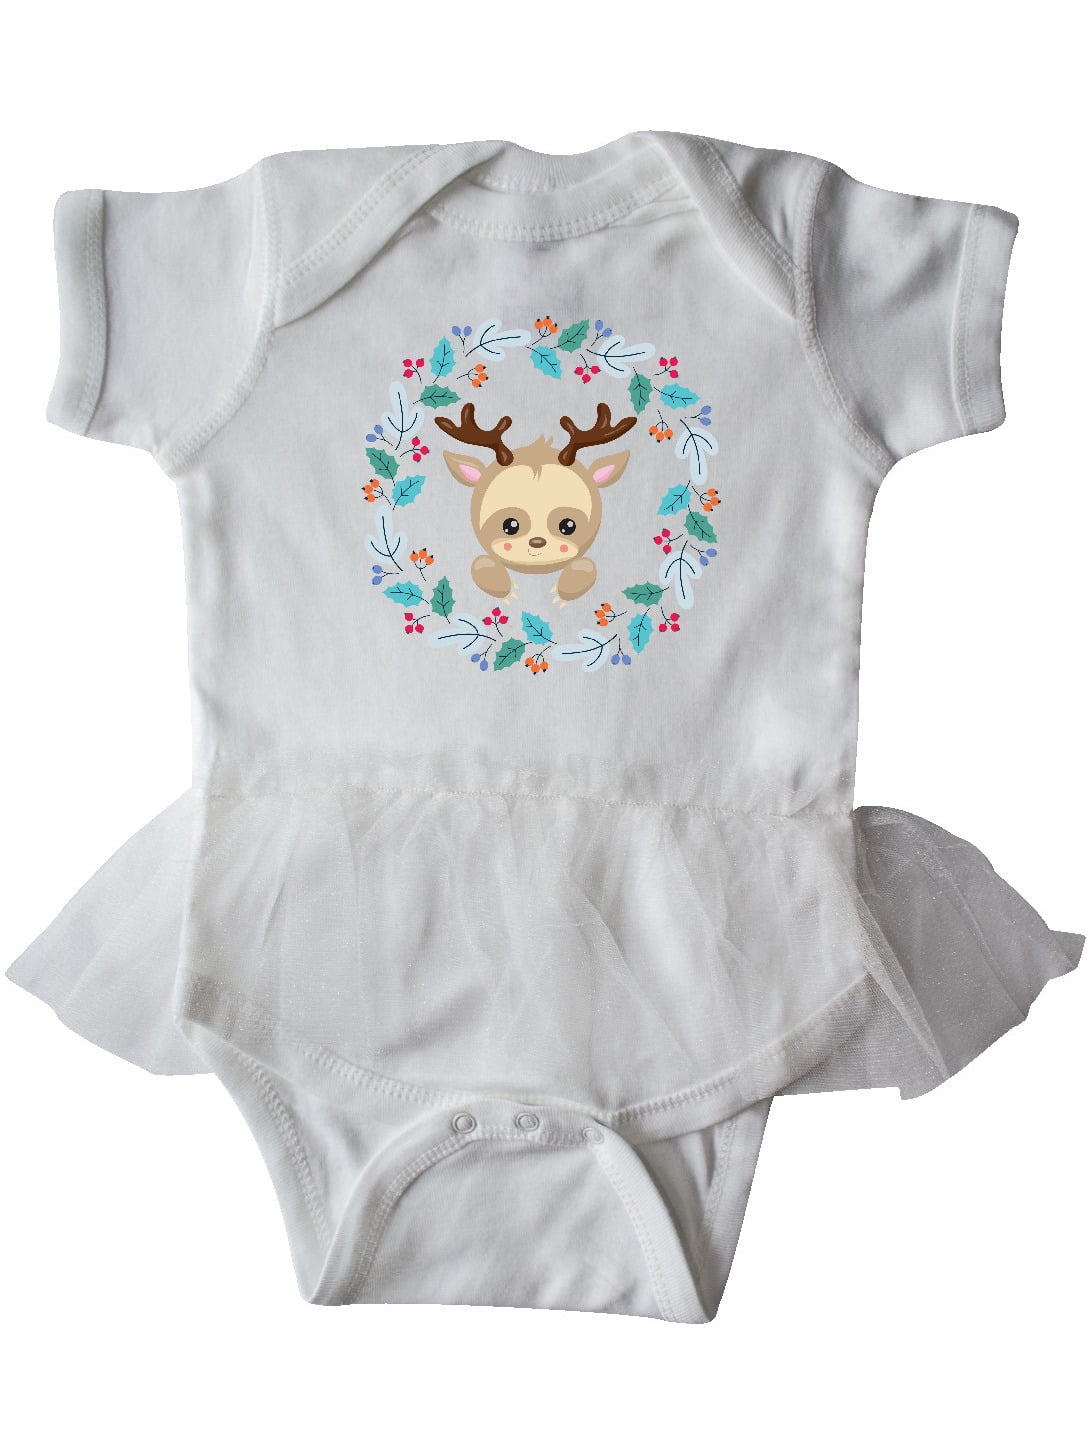 baby sloth outfit